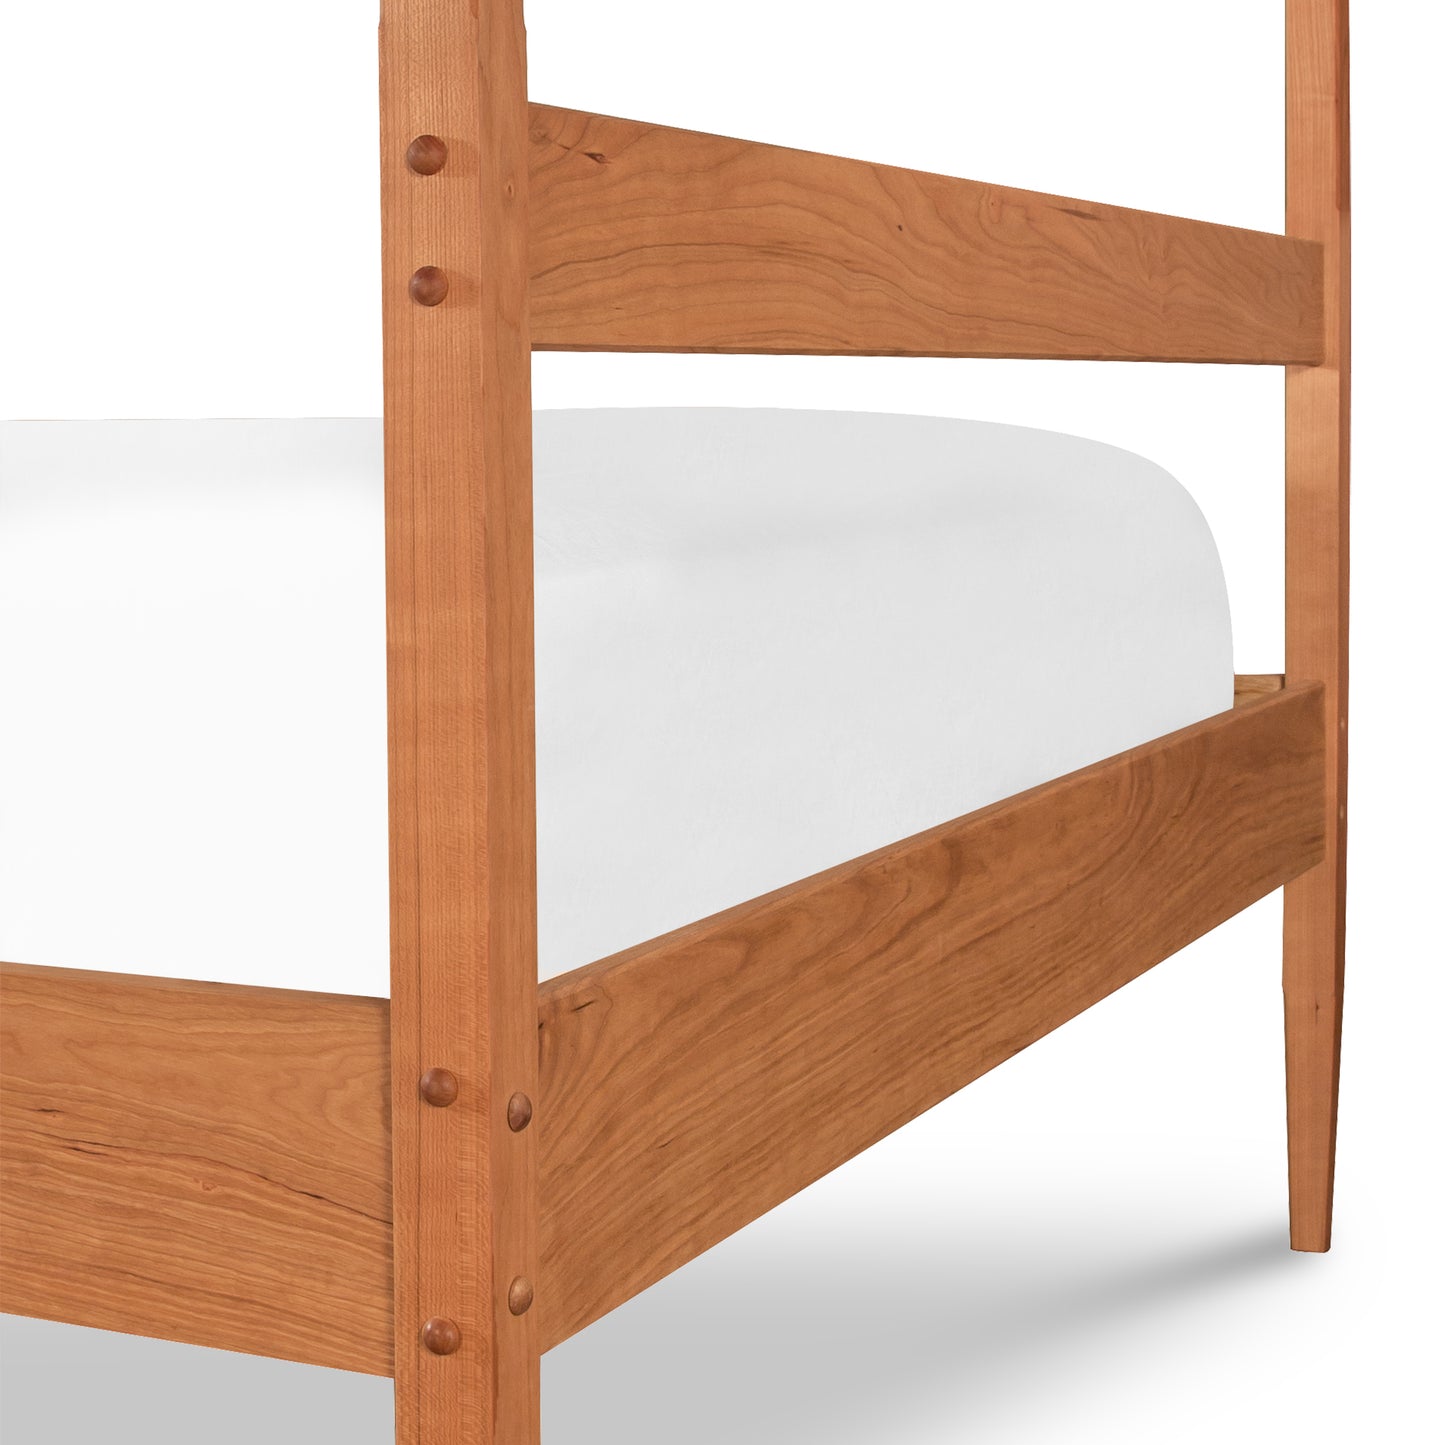 A close-up view of a wooden Vermont Shaker Four Poster Bed frame by Maple Corner Woodworks highlighting the clean, simple design and natural wood grain, with a white mattress on the lower bunk.